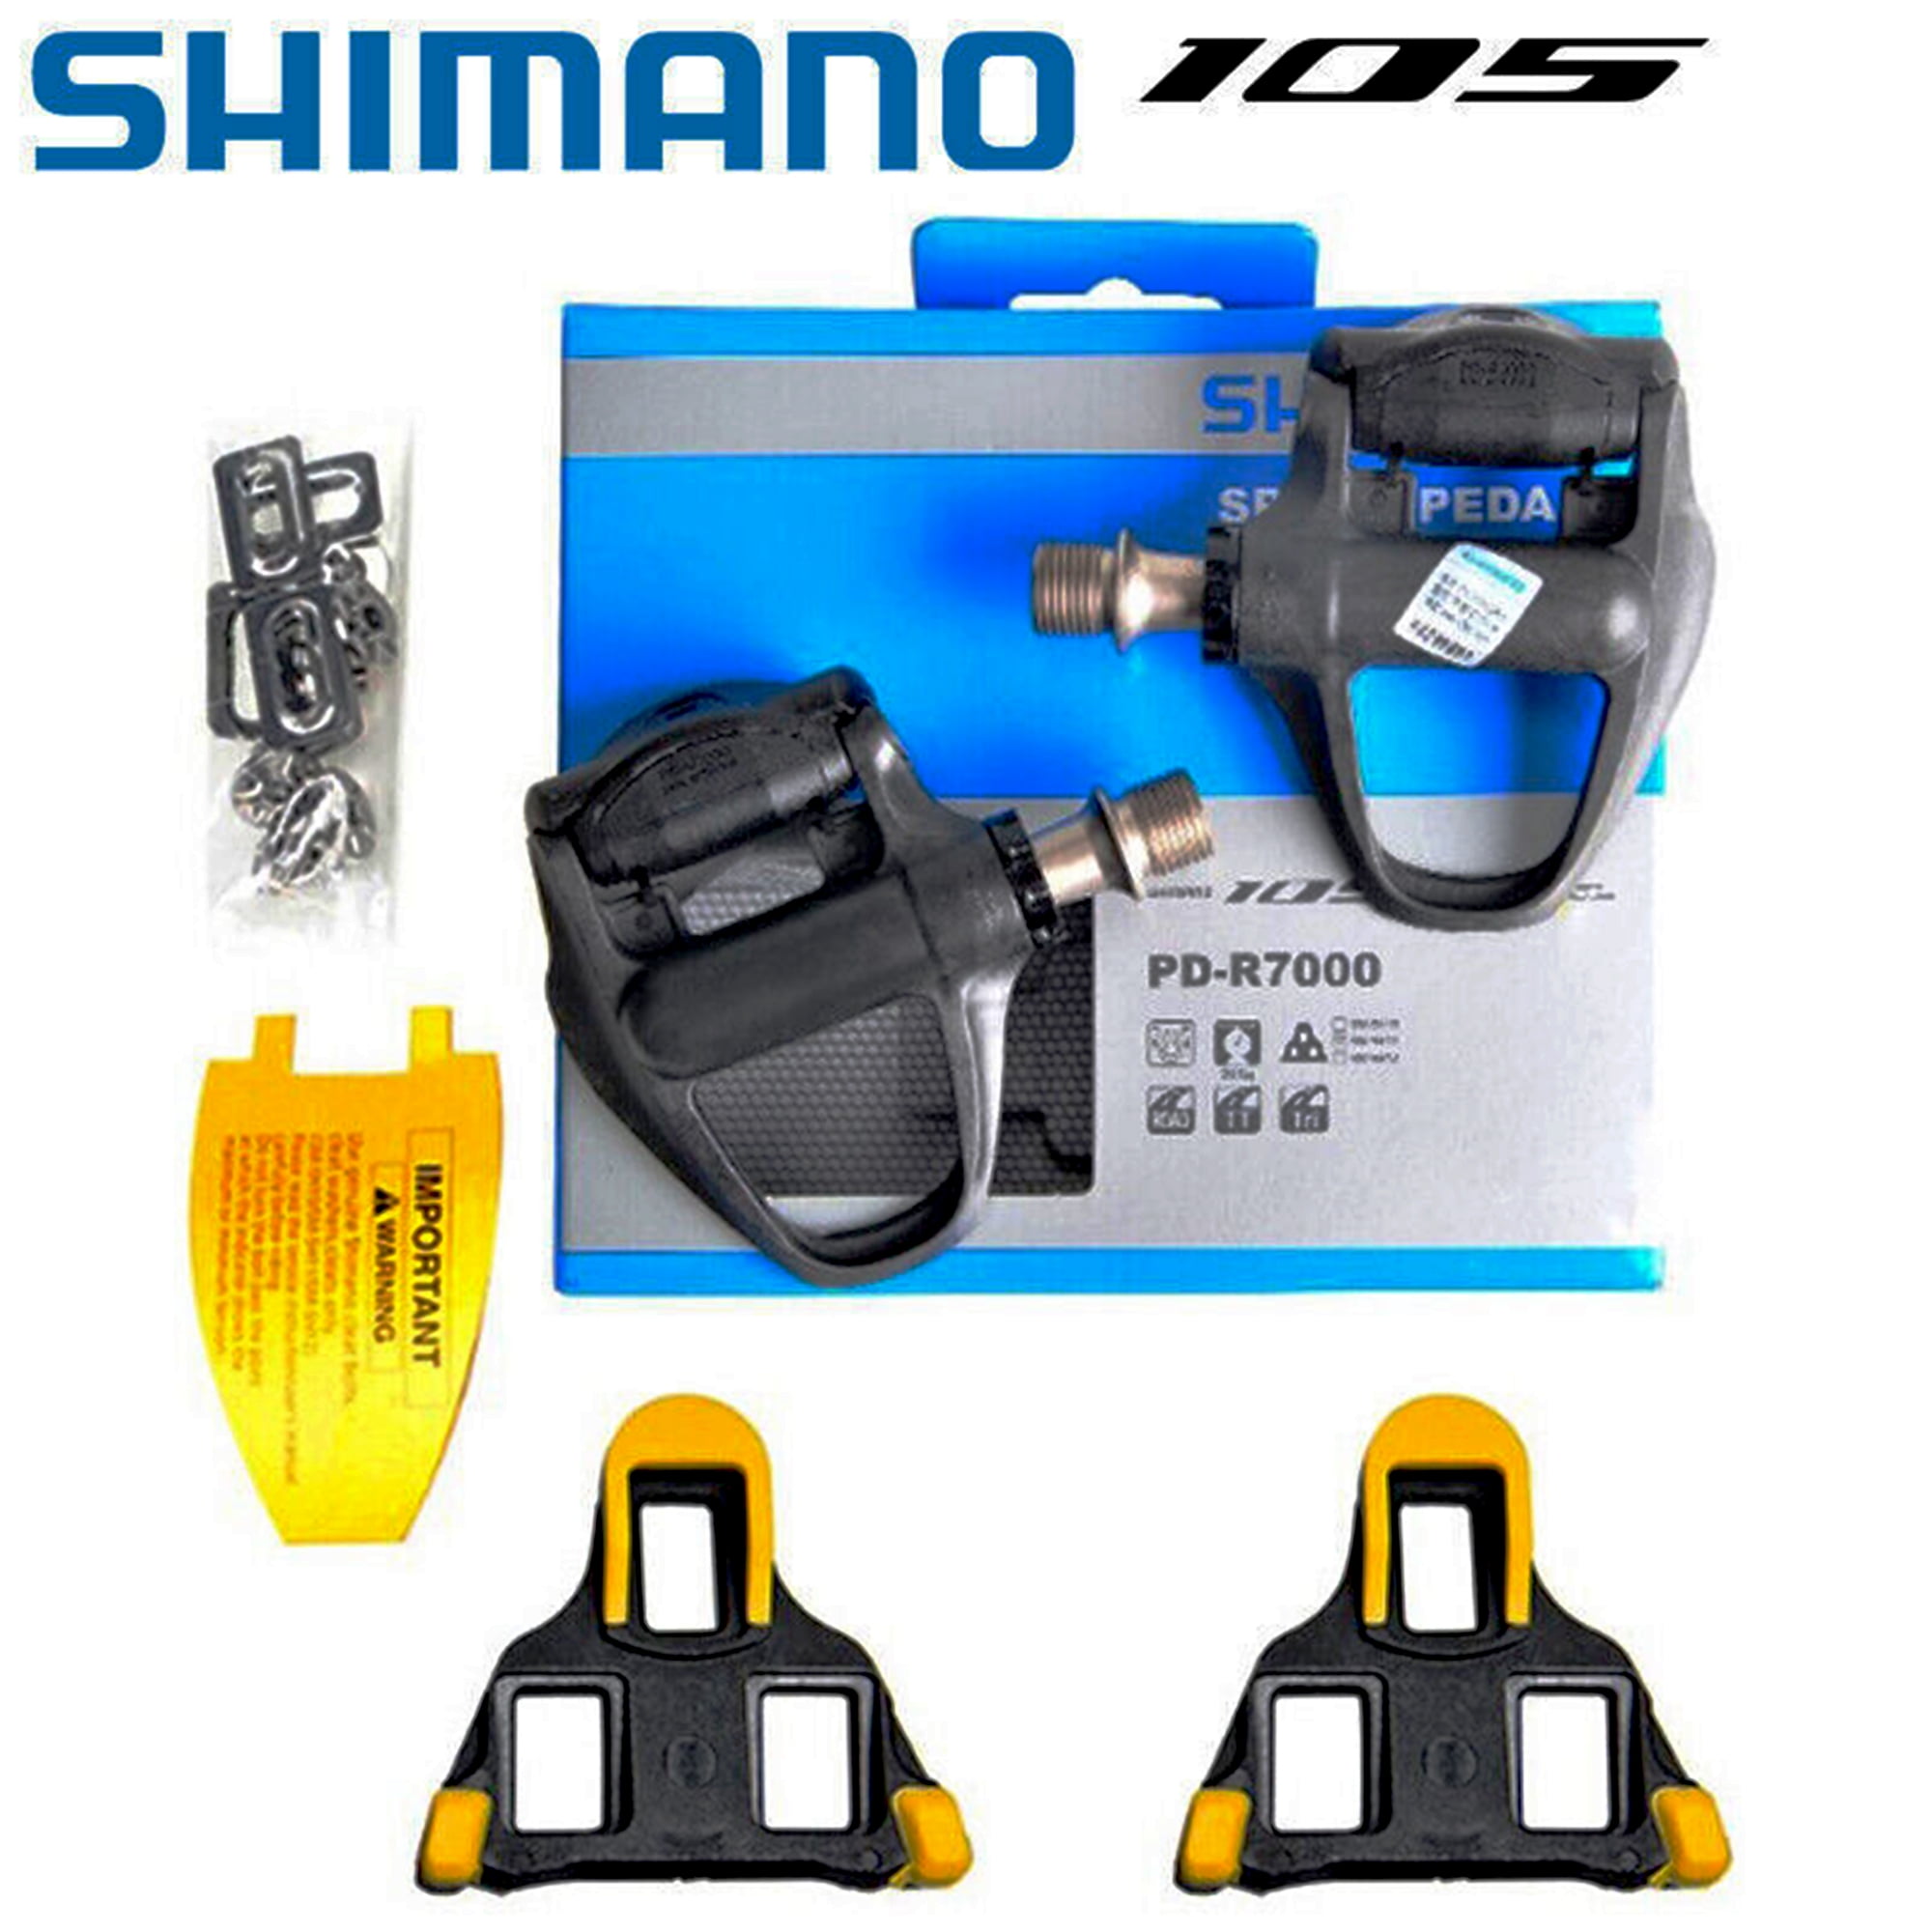 Shimano 105 PD-R7000 Carbon Fiber Road Bike Pedal with SM-SH11 Cleats 